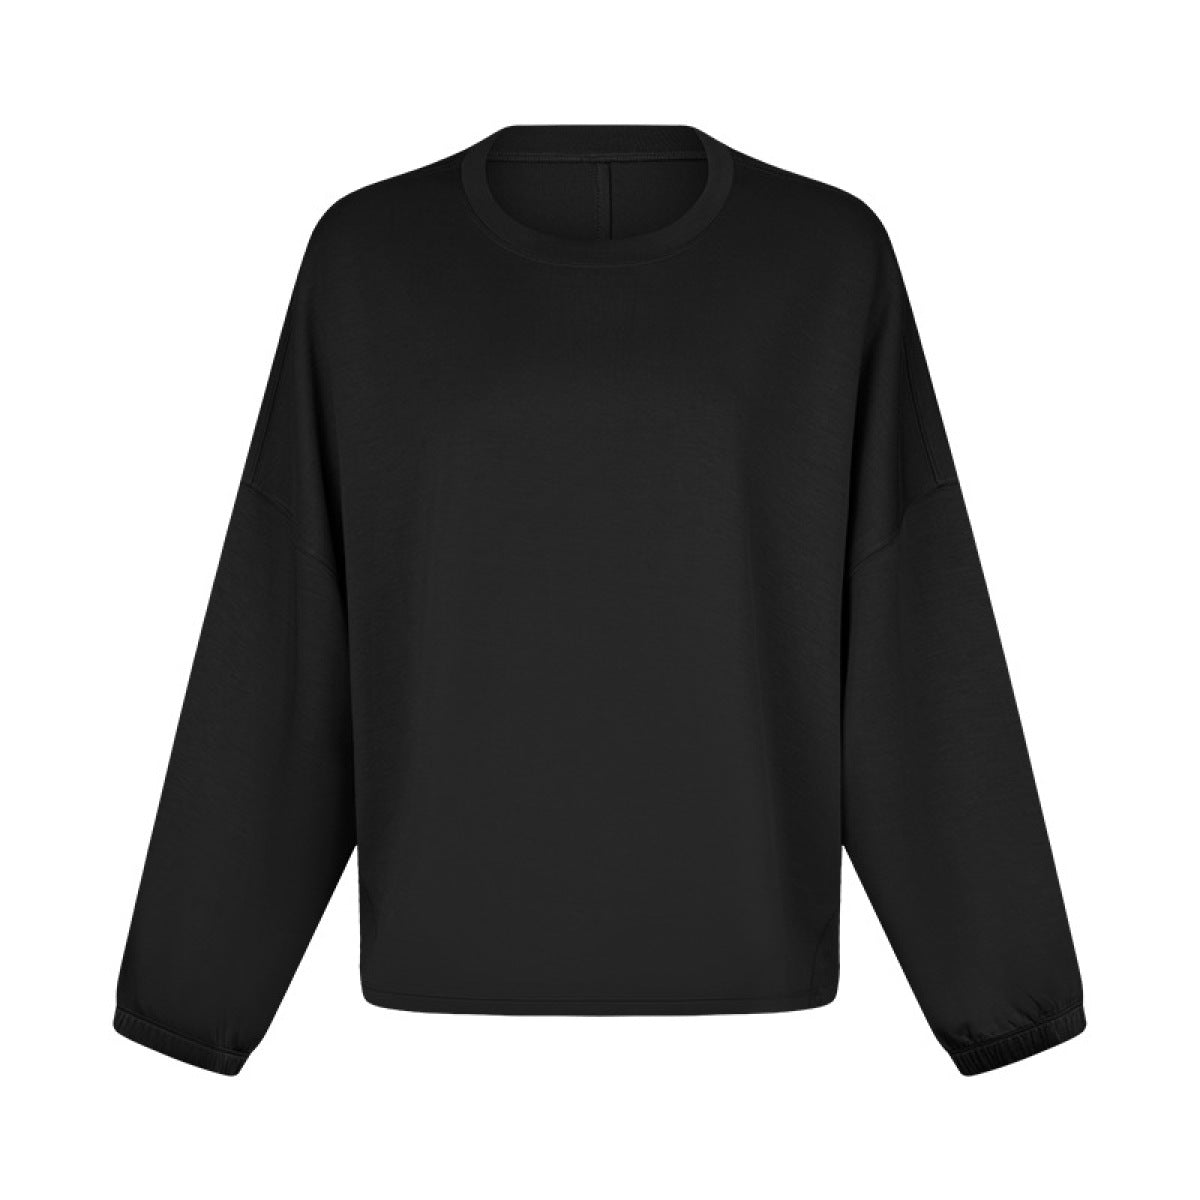 Loose Fitting Elastic Long-Sleeved Round-Neck Active Top | Art in Aging